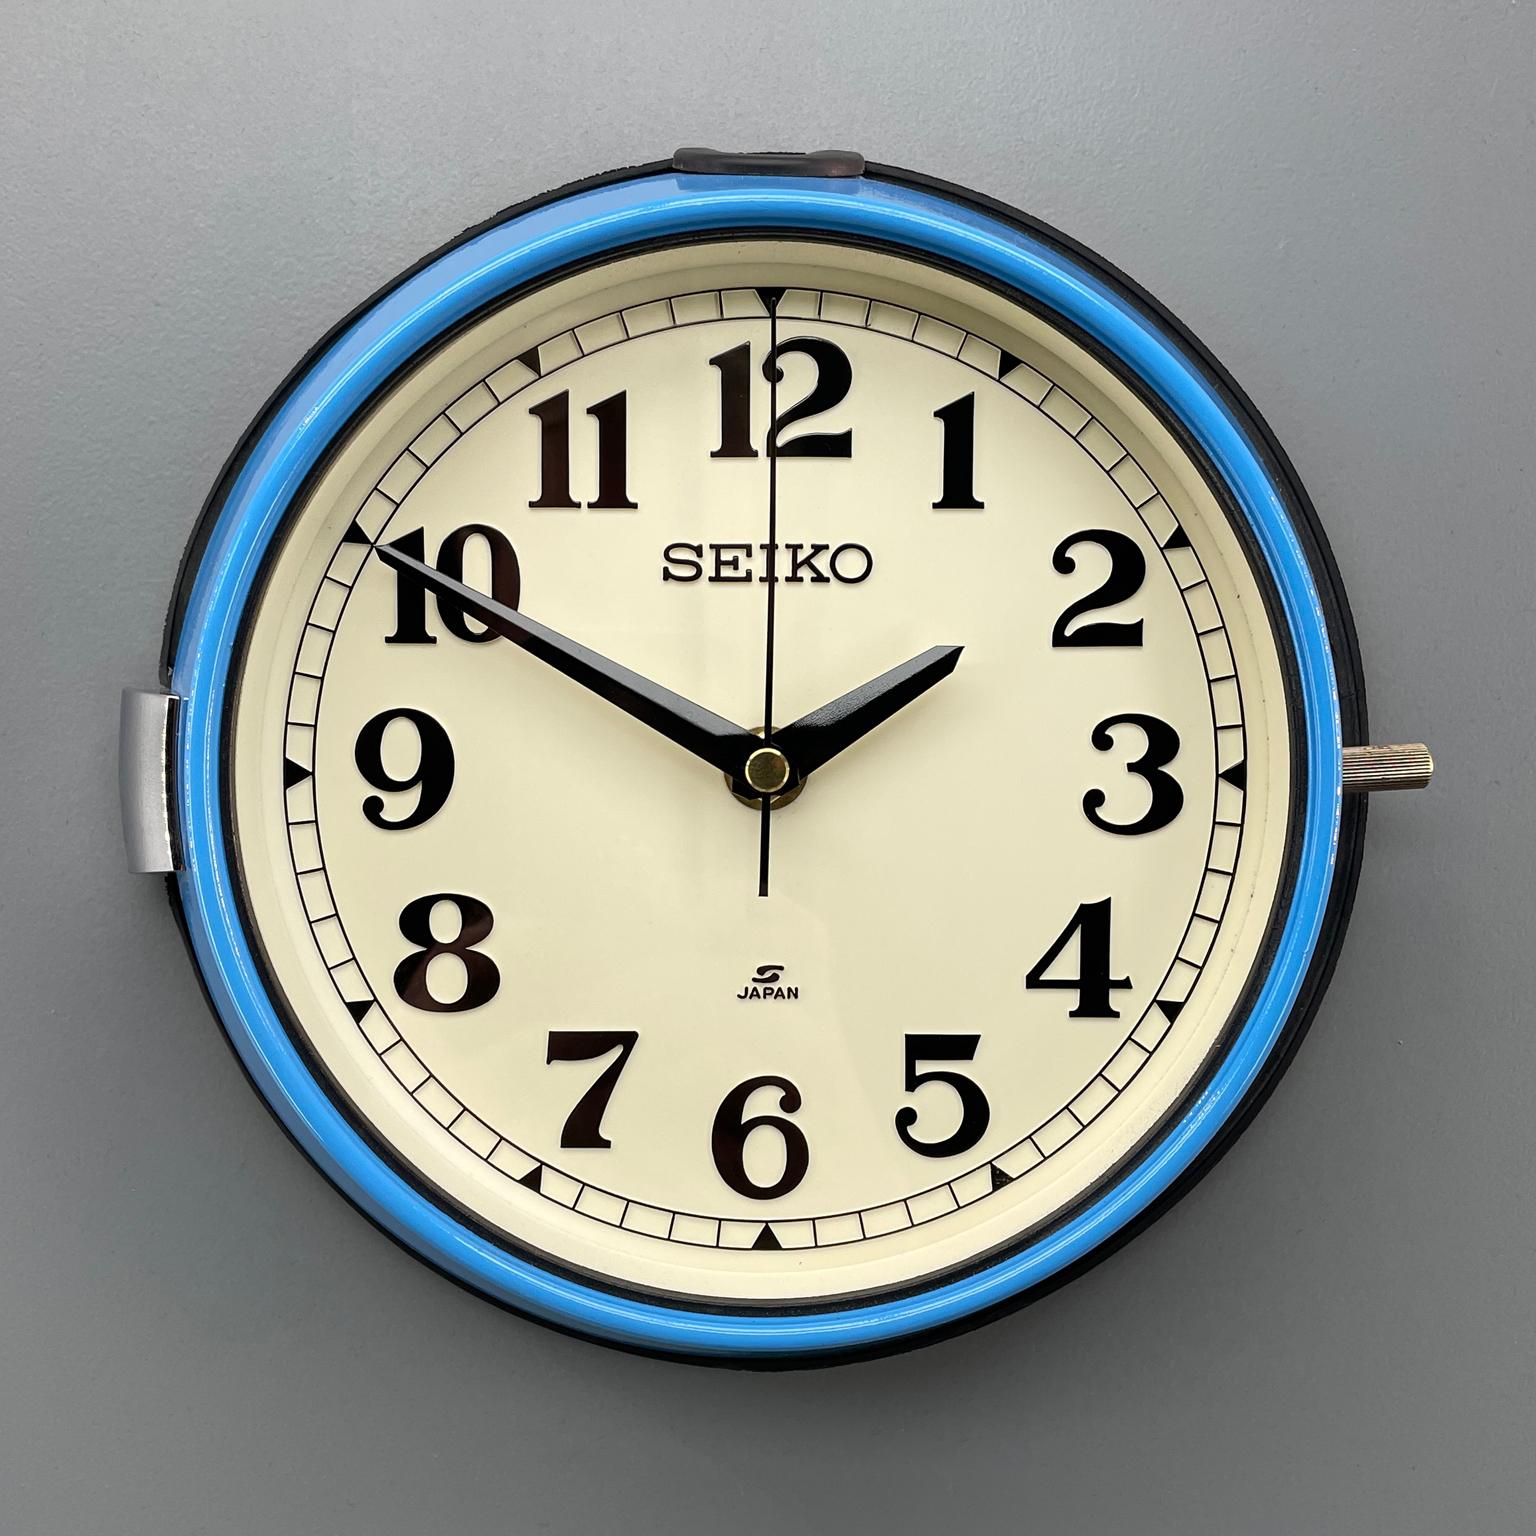 Seiko Wall Clock Made In Japan - 3 For Sale on 1stDibs